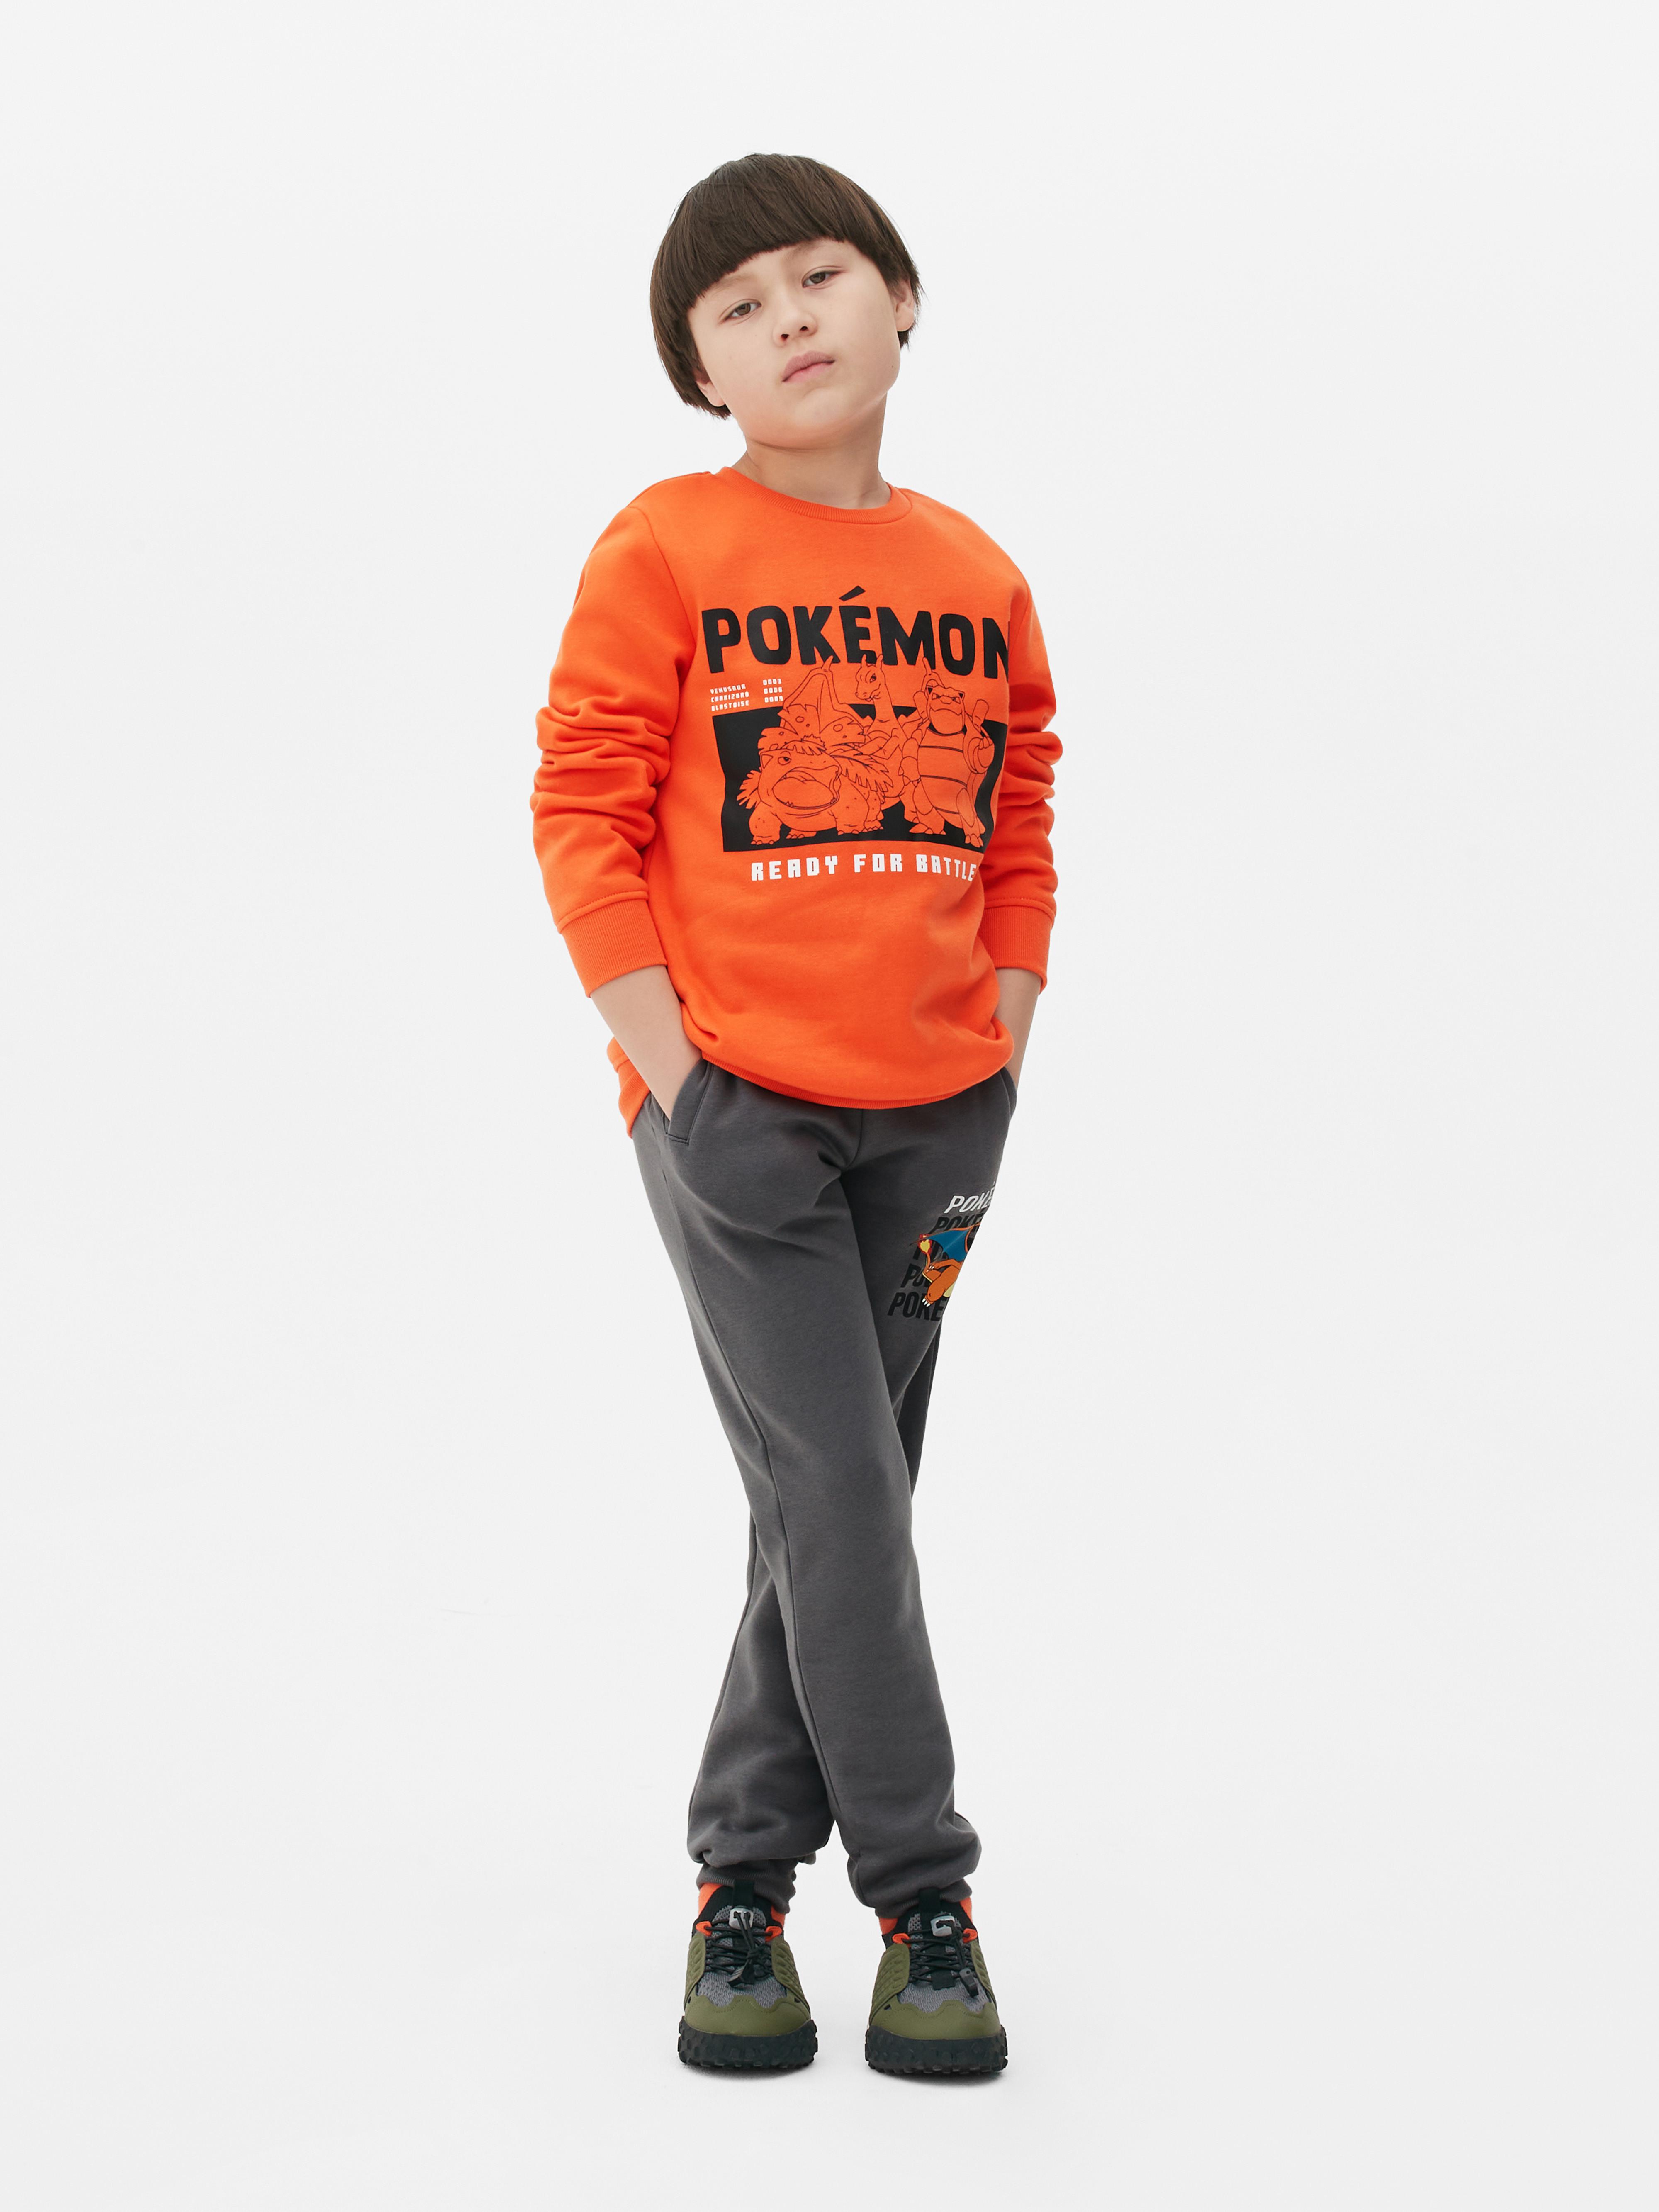 Pokémon Ready For Battle Sweater and Joggers Set